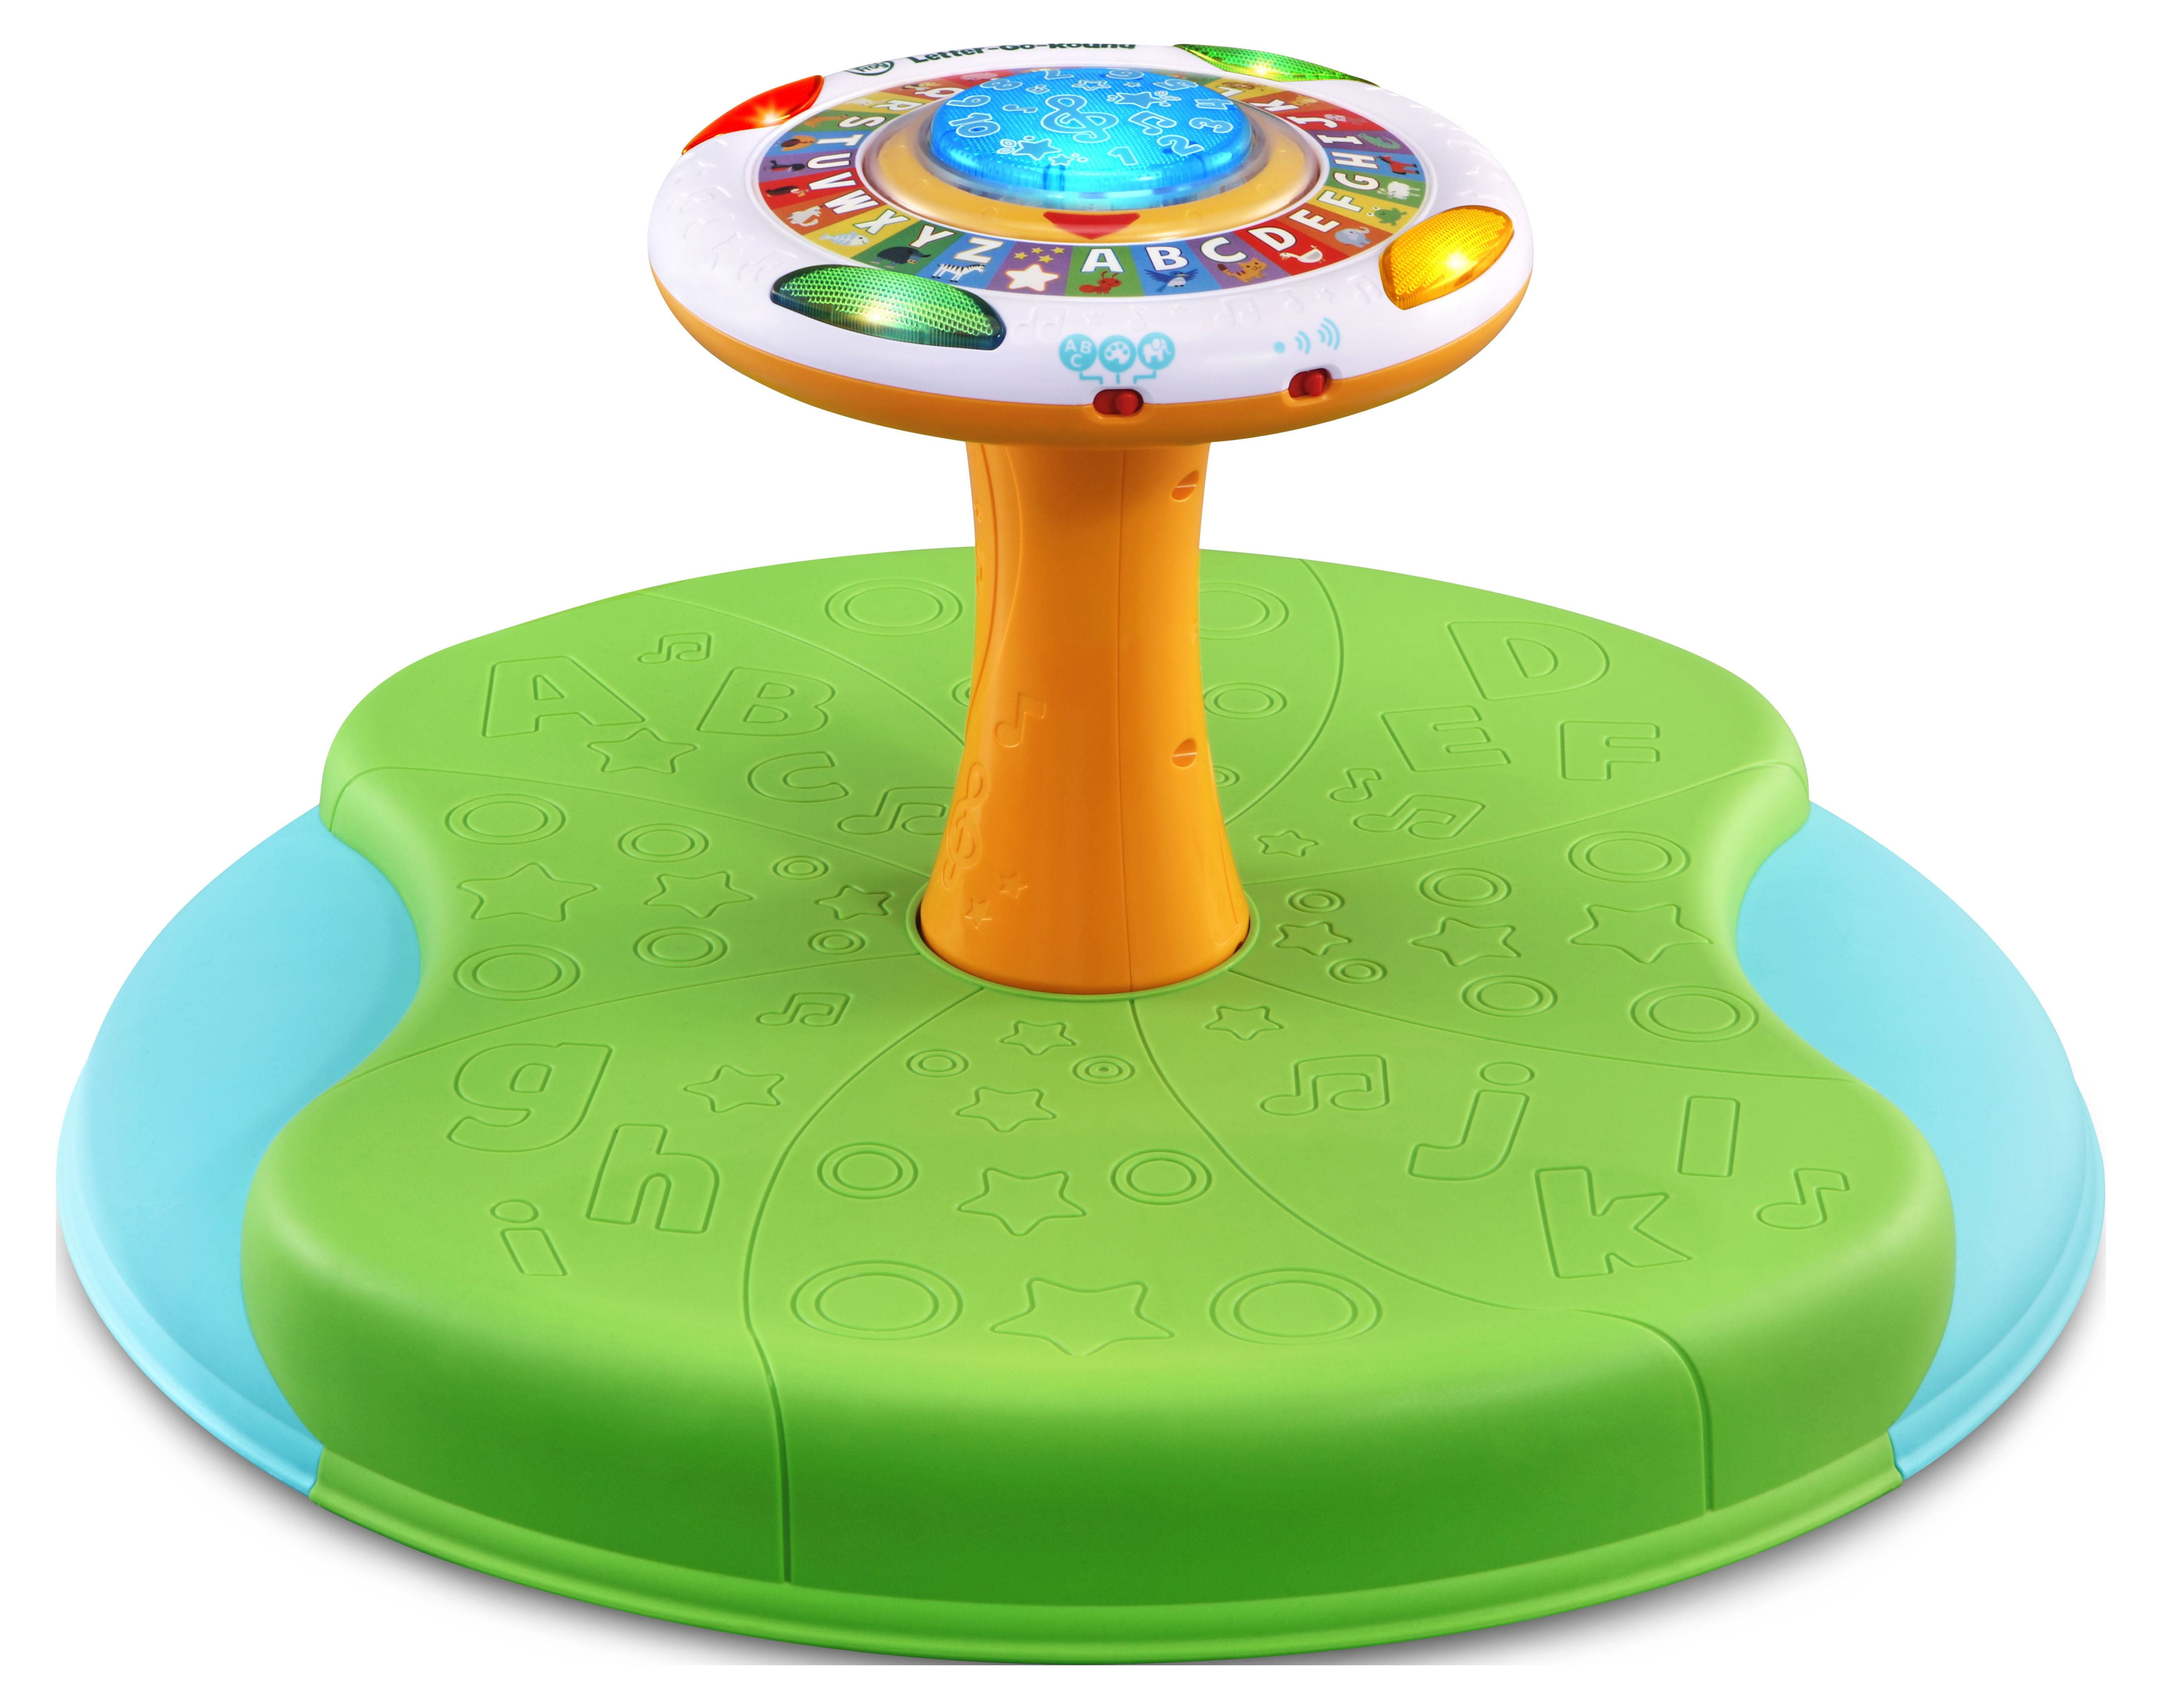 LeapFrog Letter-Go-Round Spin & Learn Toddler Toy $23 + Free S&H w/ Walmart+ or $35+